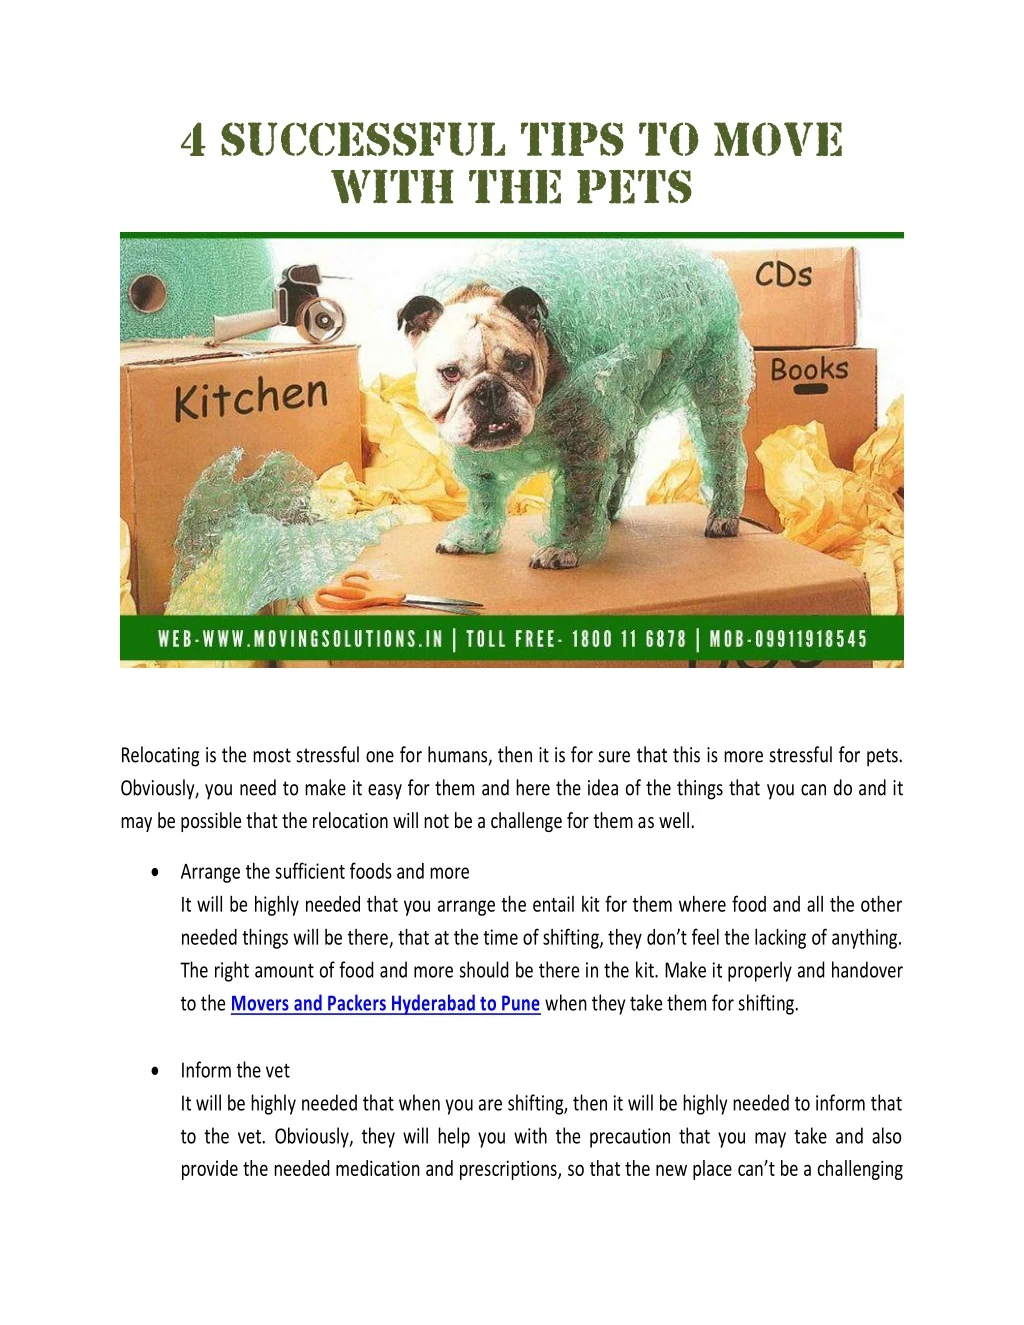 4 successful tips to move with the pets